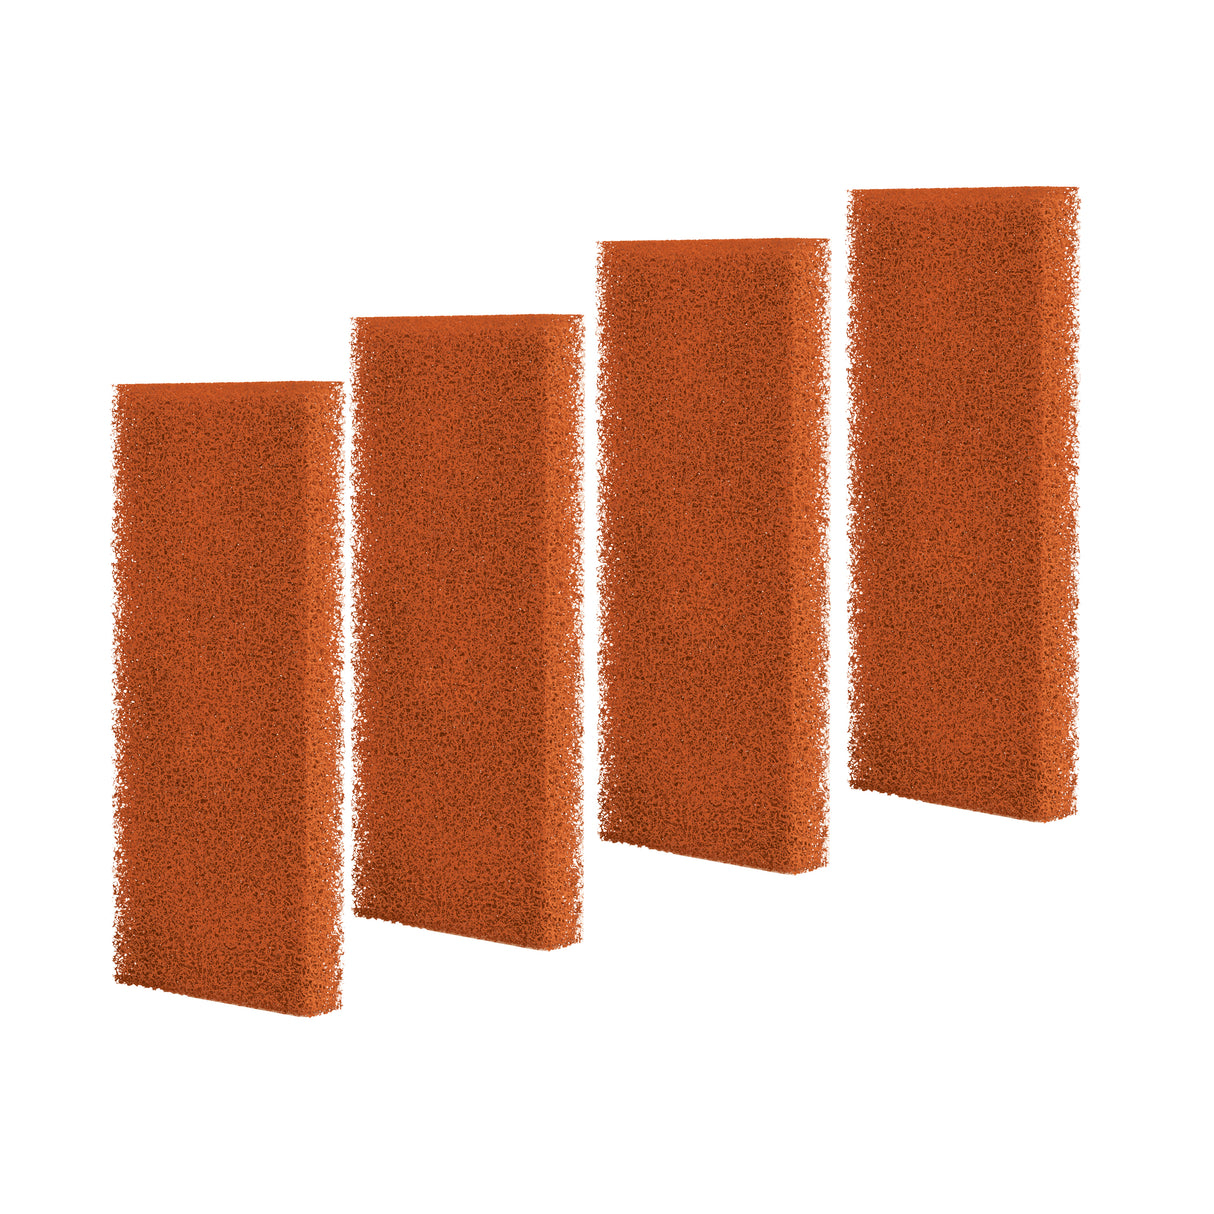 Biological Filter Foam for the BioStyle Set of 4